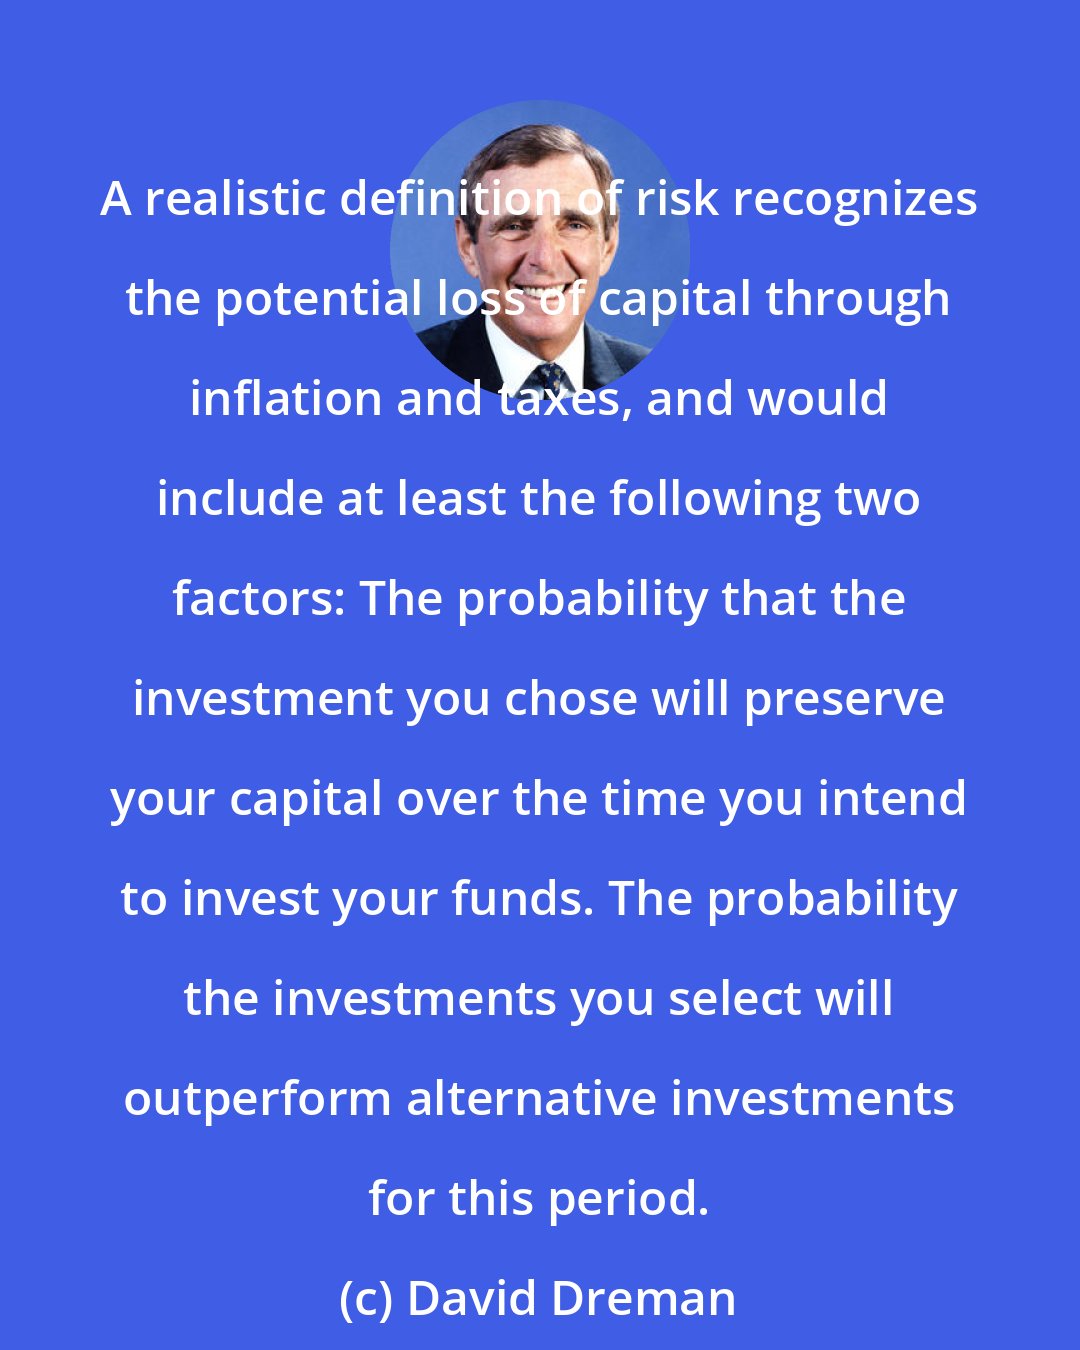 David Dreman: A realistic definition of risk recognizes the potential loss of capital through inflation and taxes, and would include at least the following two factors: The probability that the investment you chose will preserve your capital over the time you intend to invest your funds. The probability the investments you select will outperform alternative investments for this period.